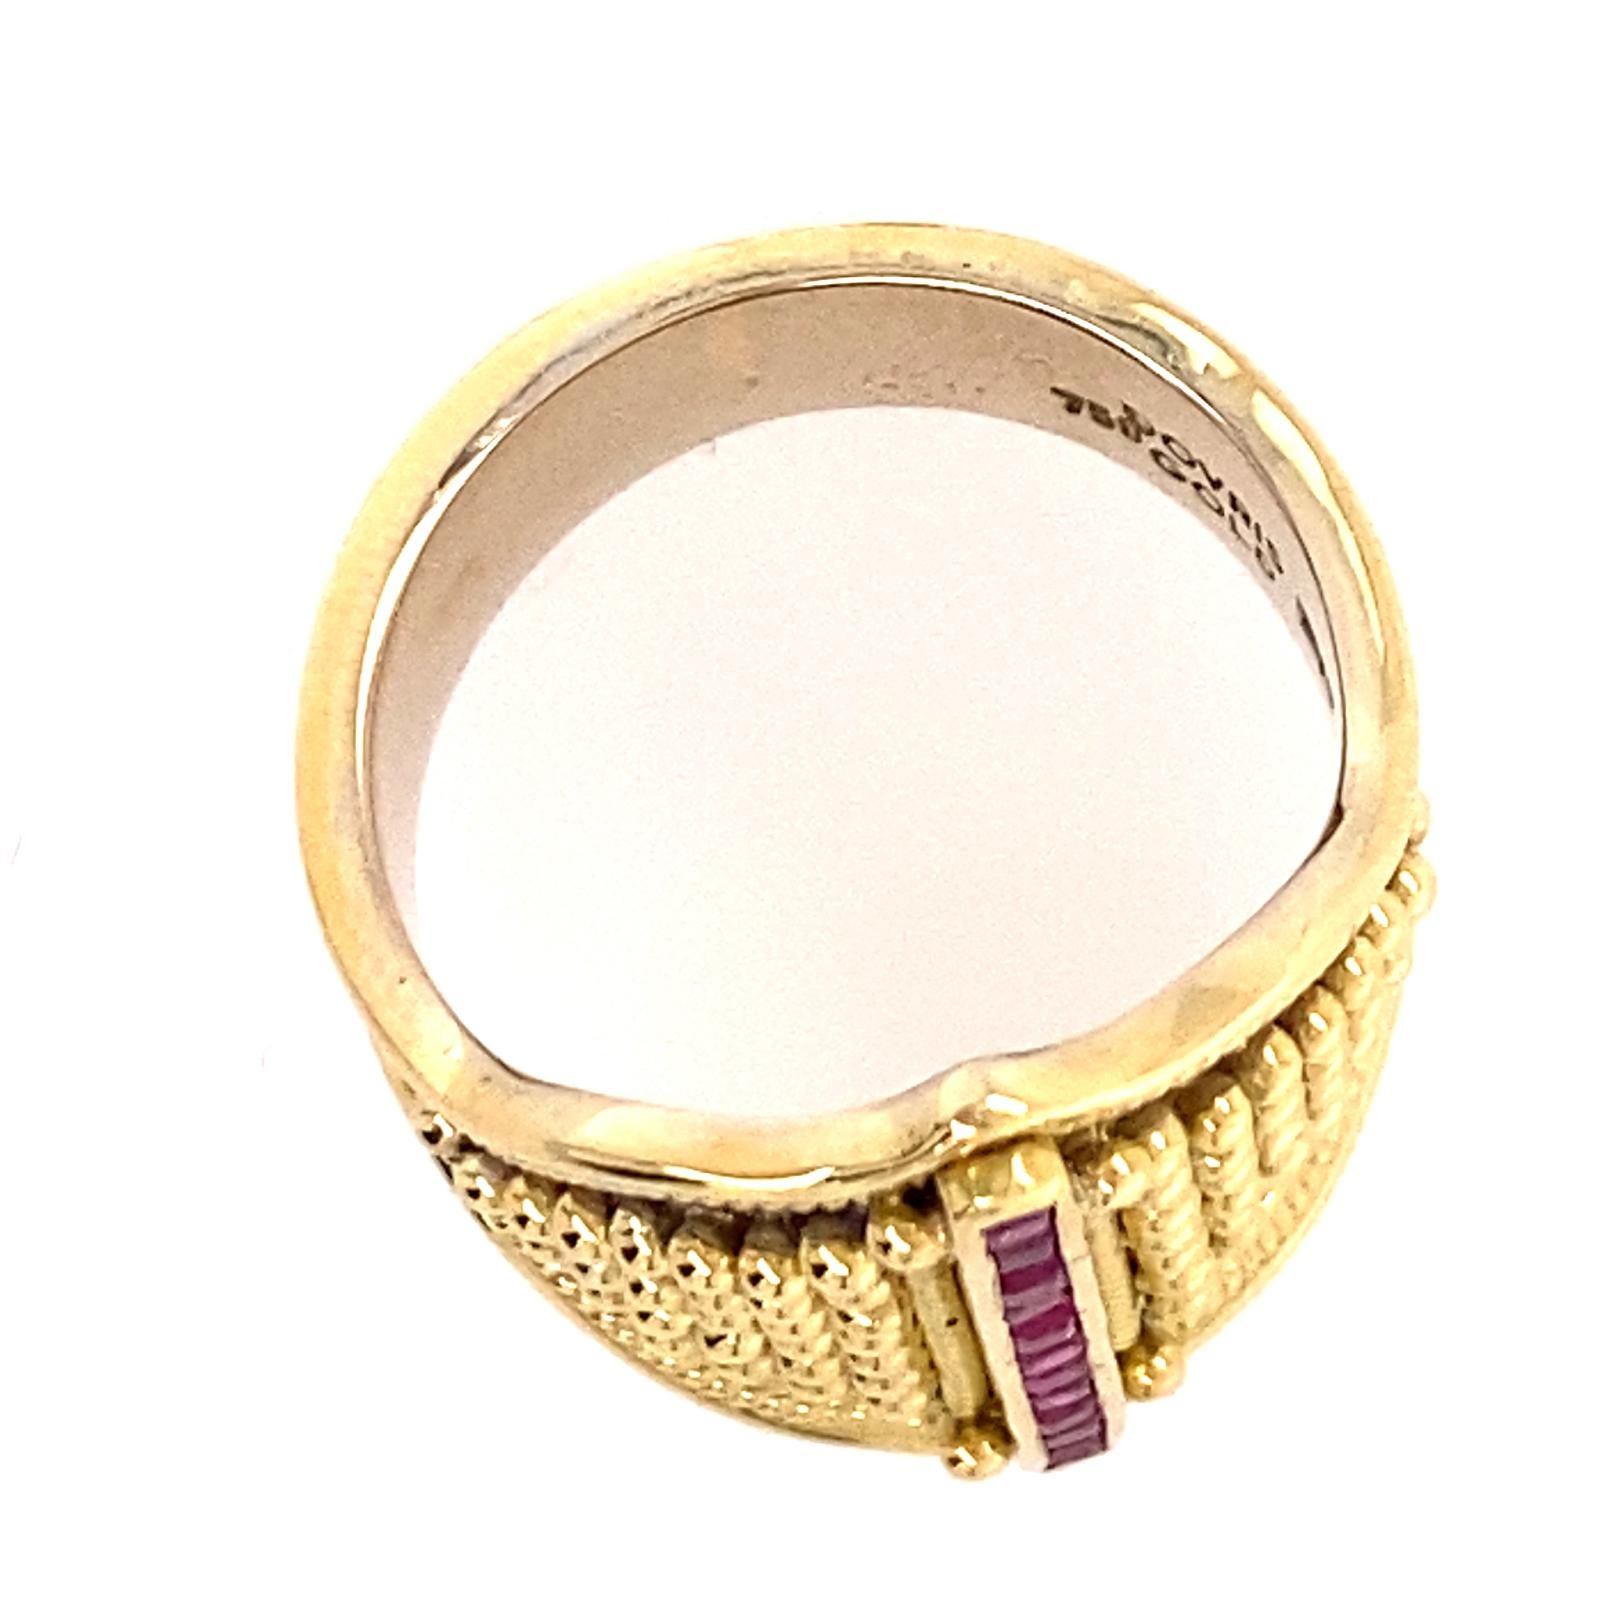 Cigar Band or Shield Ring in 18K Gold with Carré-Cut Rubies & Granulation Detail 3